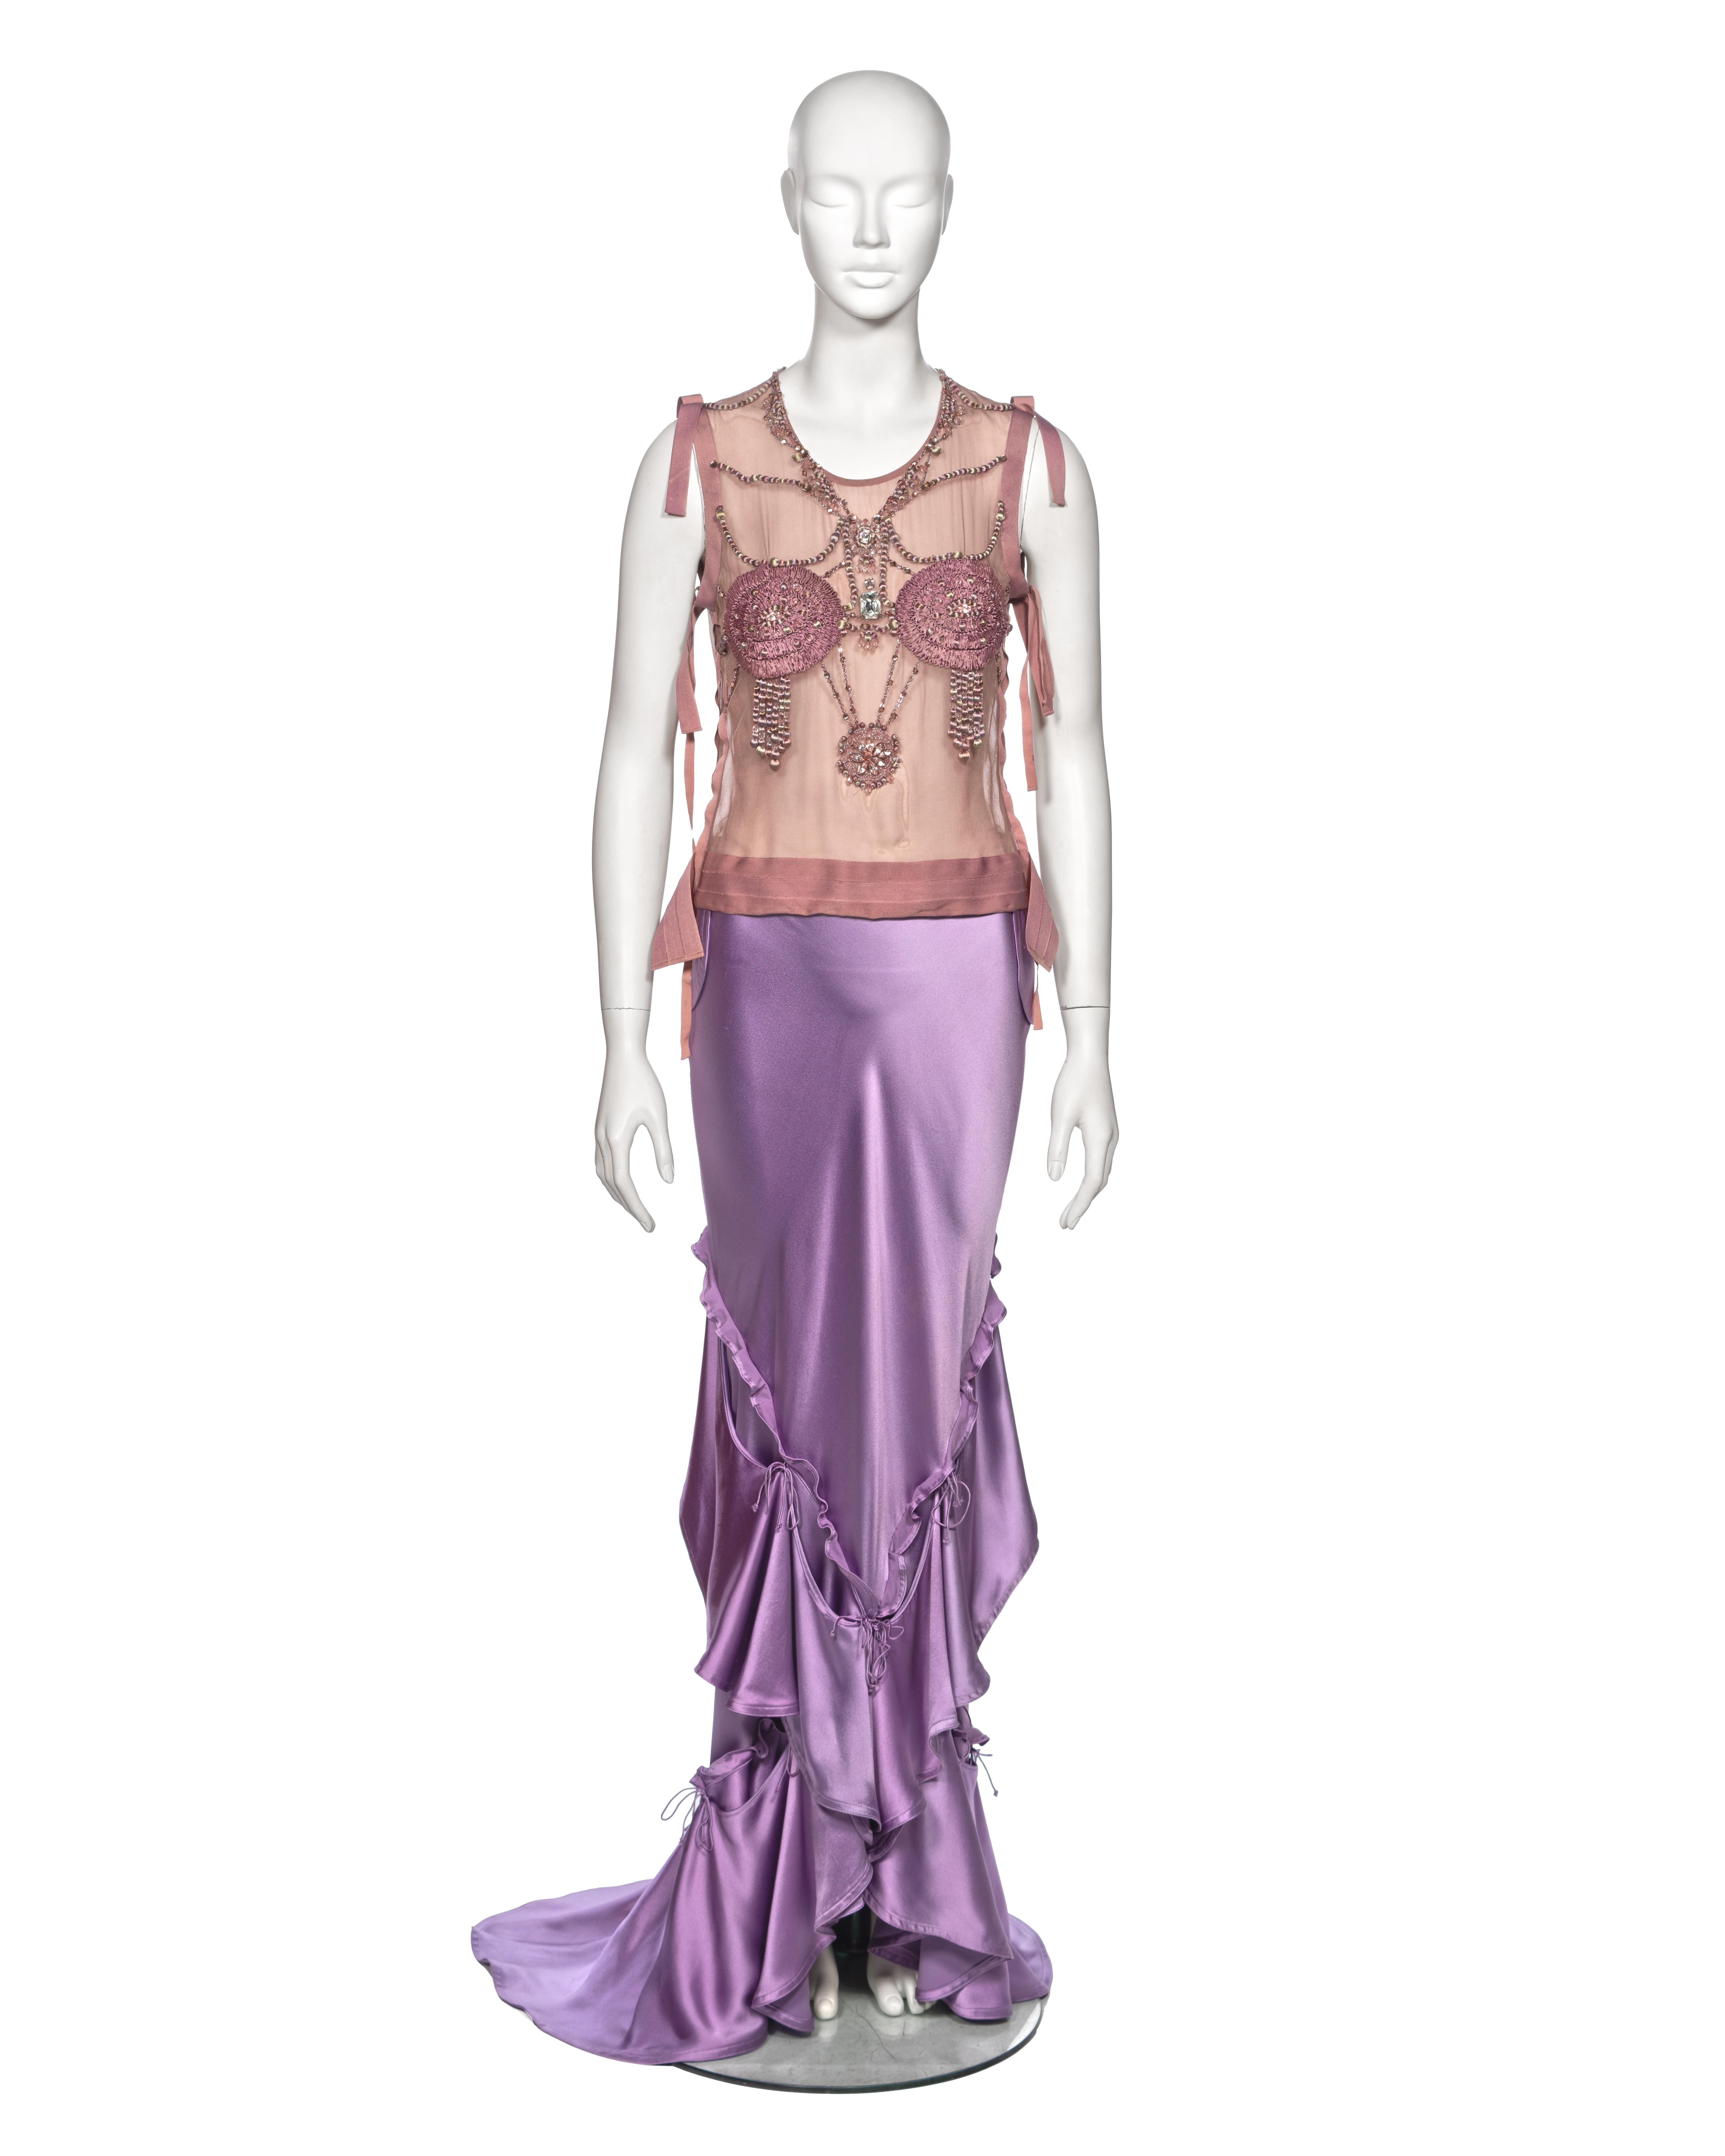 ▪ Archival Yves Saint Laurent Runway Evening Ensemble
▪ Creative Director: Tom Ford
▪ Fall-Winter 2003
▪ Sold by One of a Kind Archive
▪ Crafted from fine dusty pink silk tulle, this embellished evening top features intricate embroidery with tonal